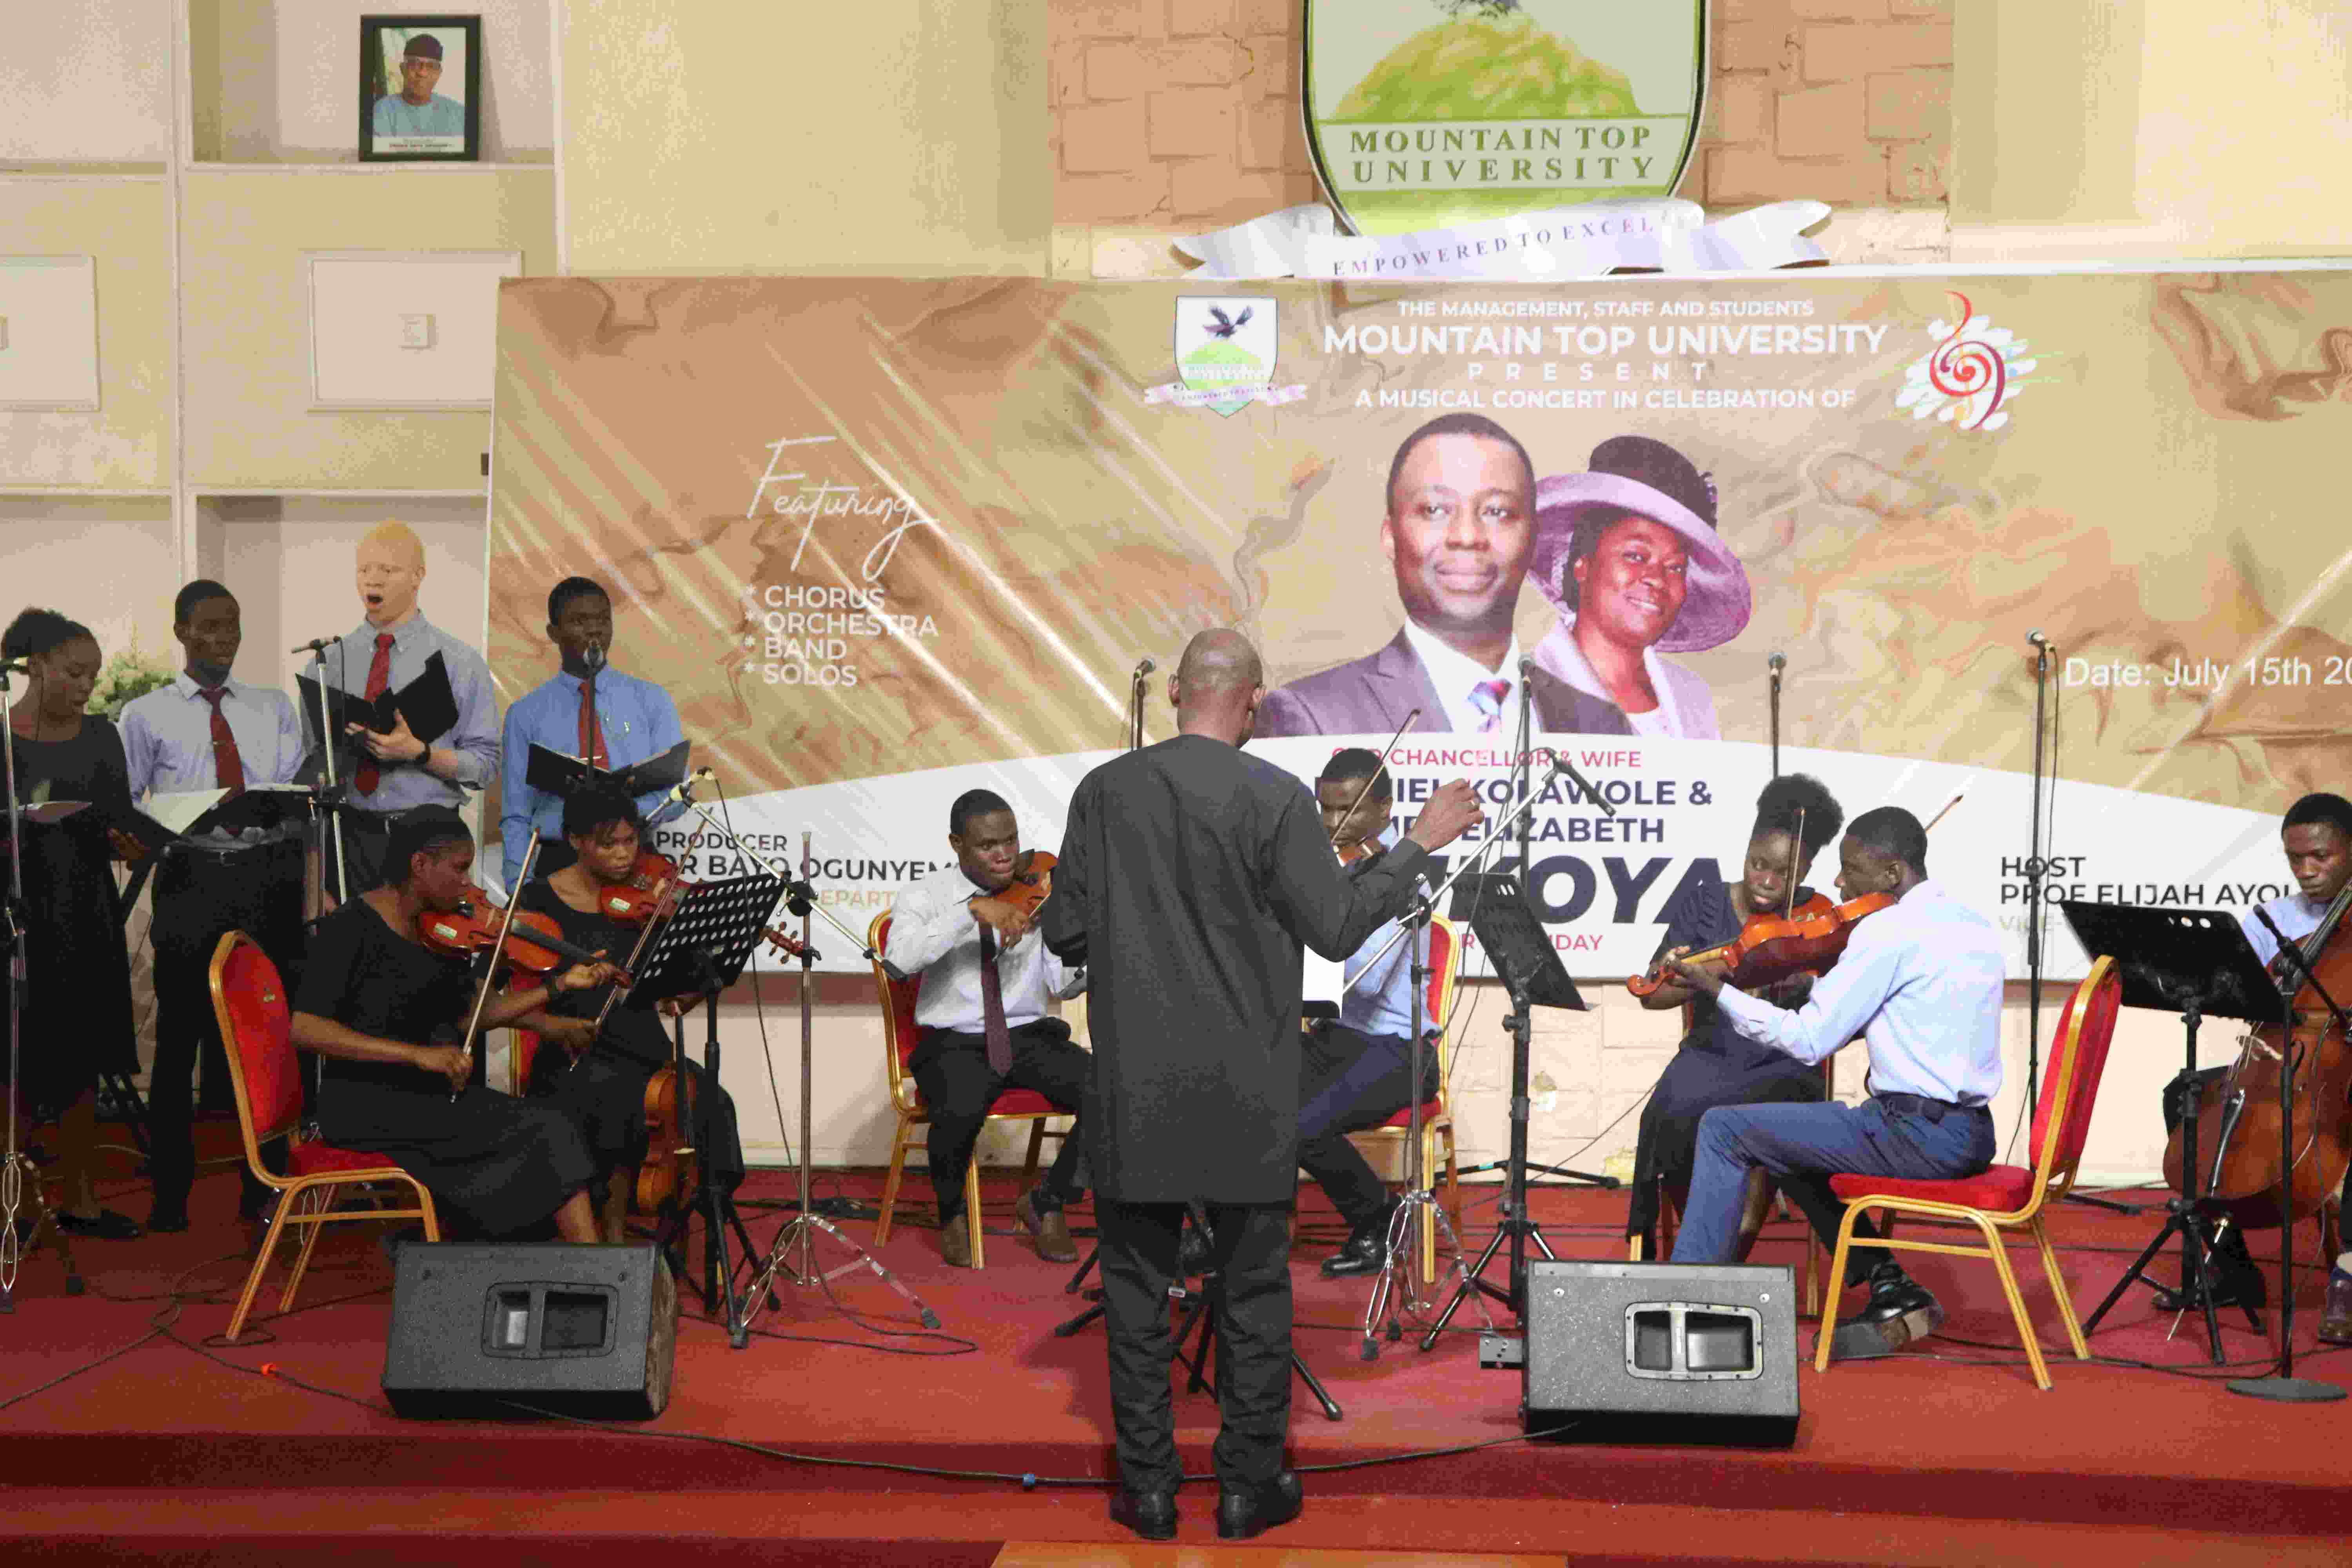 Excitement as Mountain Top University Holds a Musical Concert.